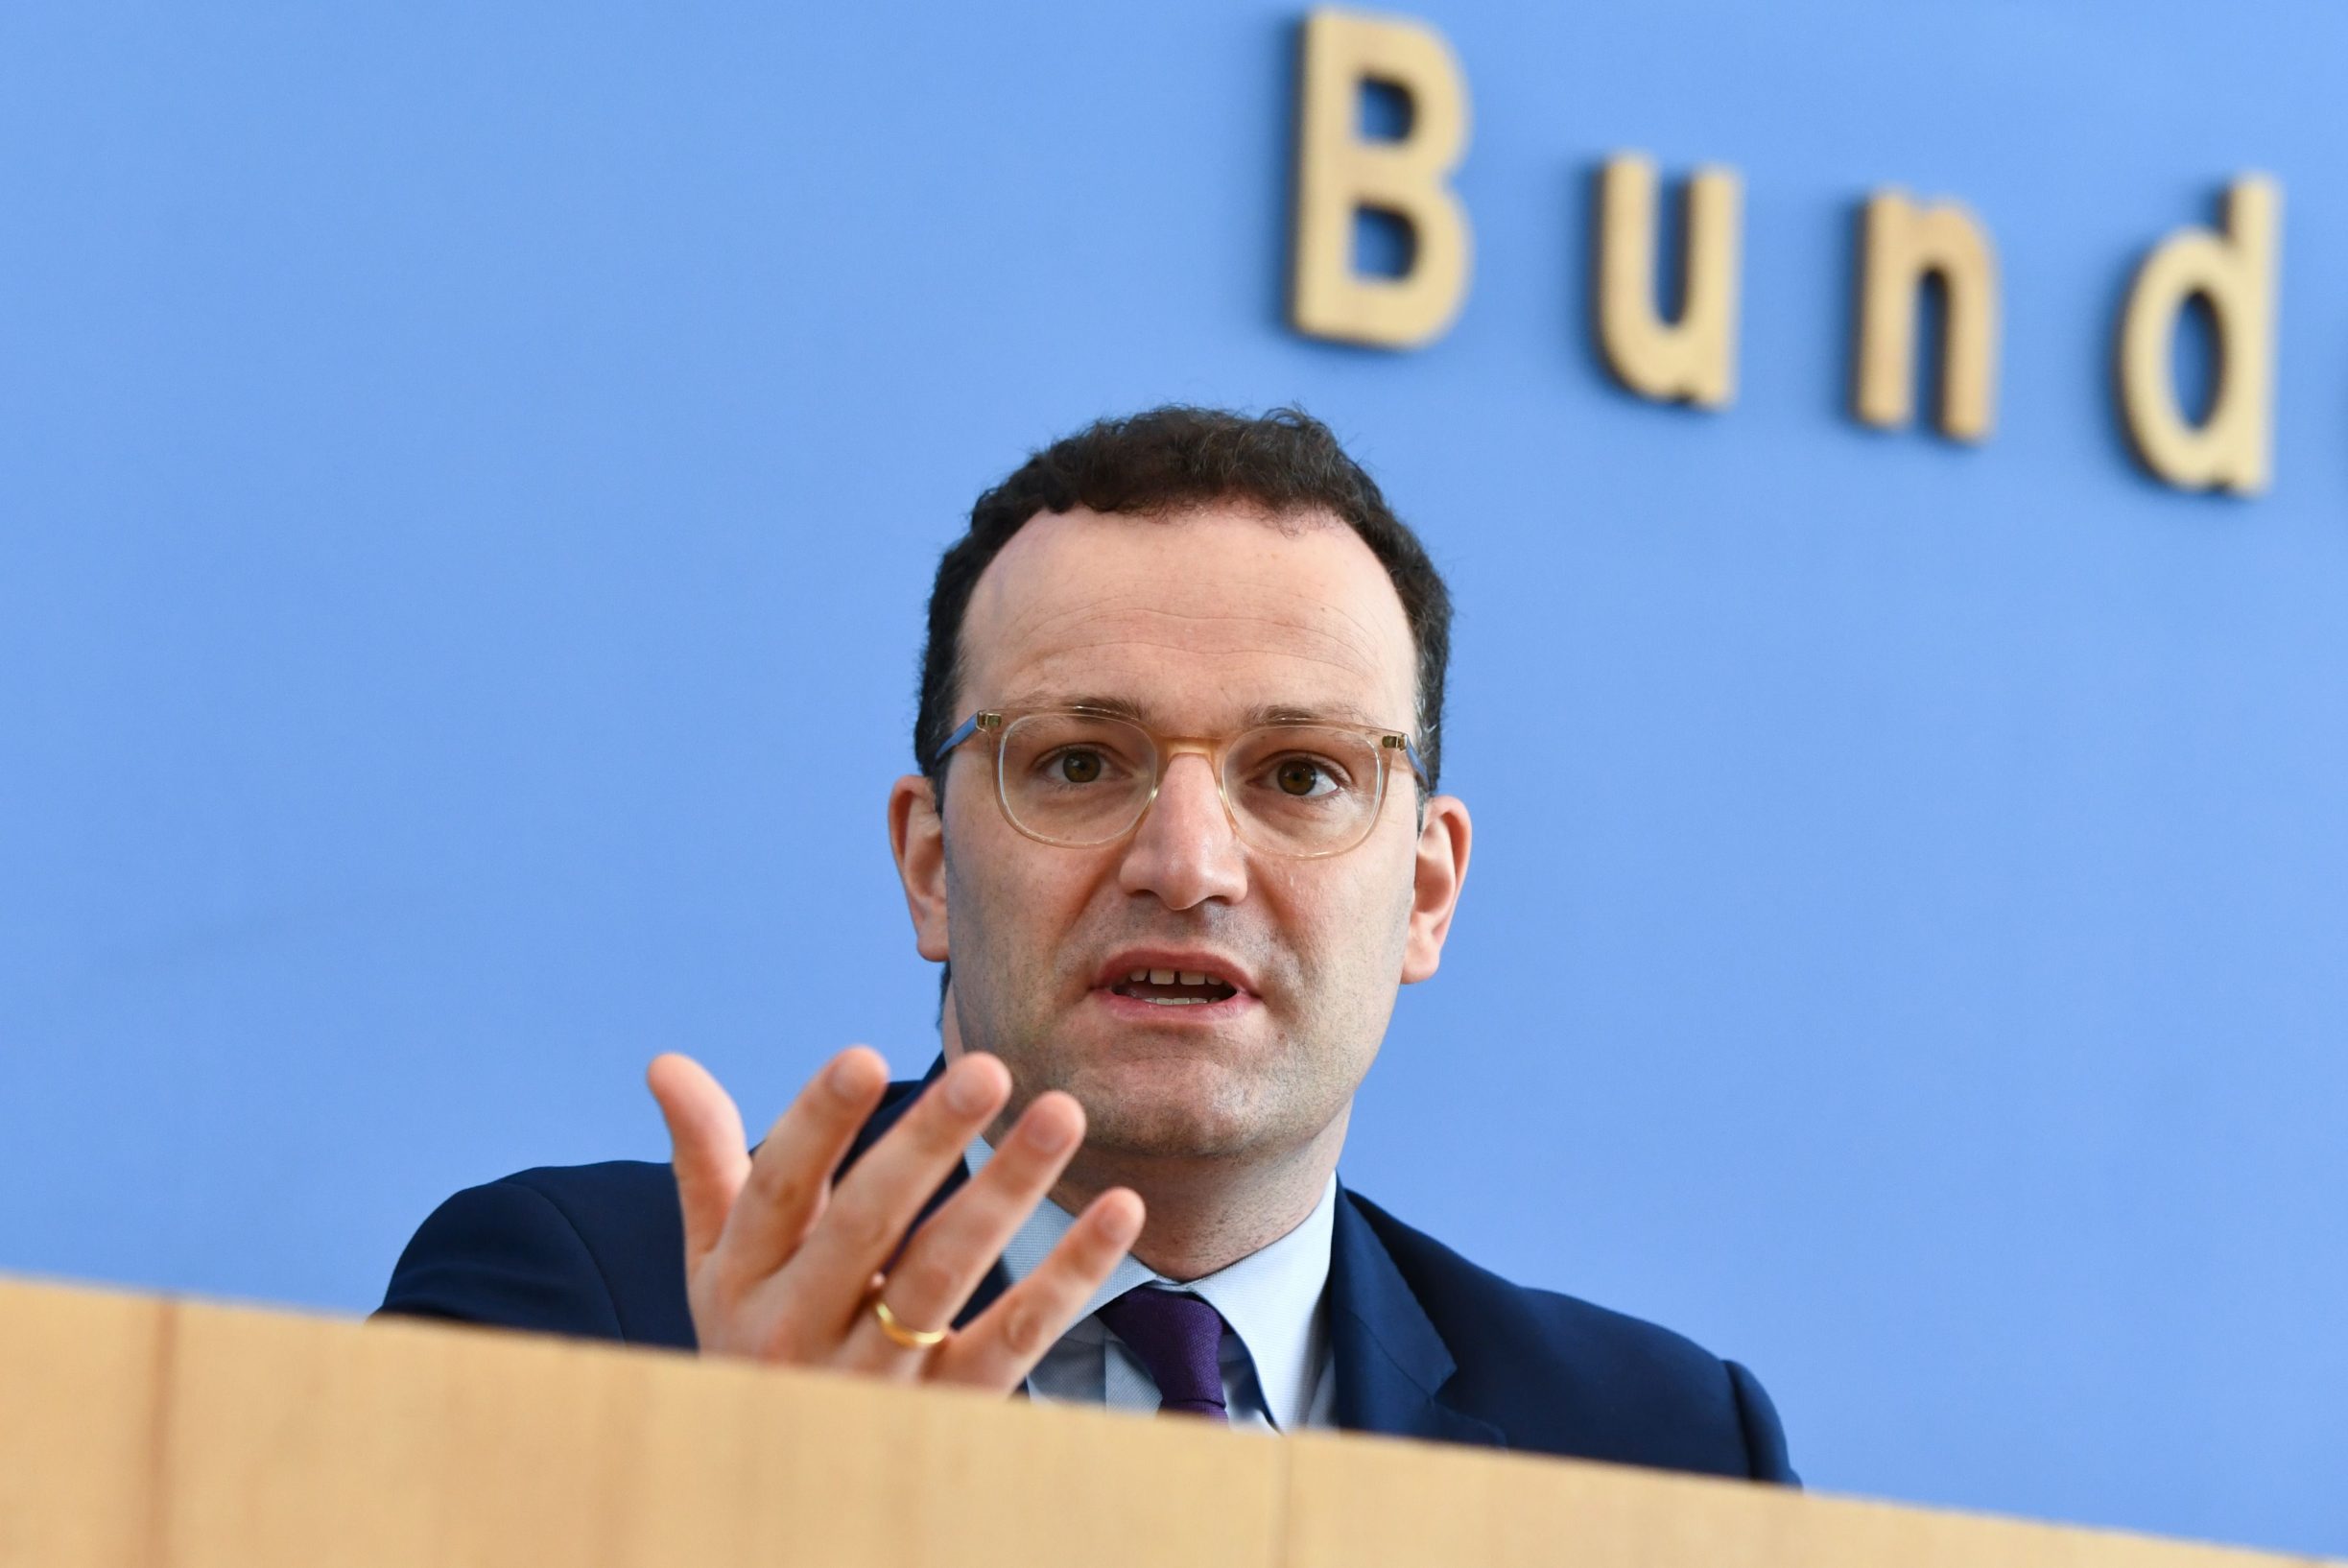 German Health Minister Jens Spahn gives a press conference on the novel coronavirus COVID-19 pandemic in Berlin on April 9, 2020. (Photo by ANNEGRET HILSE / POOL / AFP)